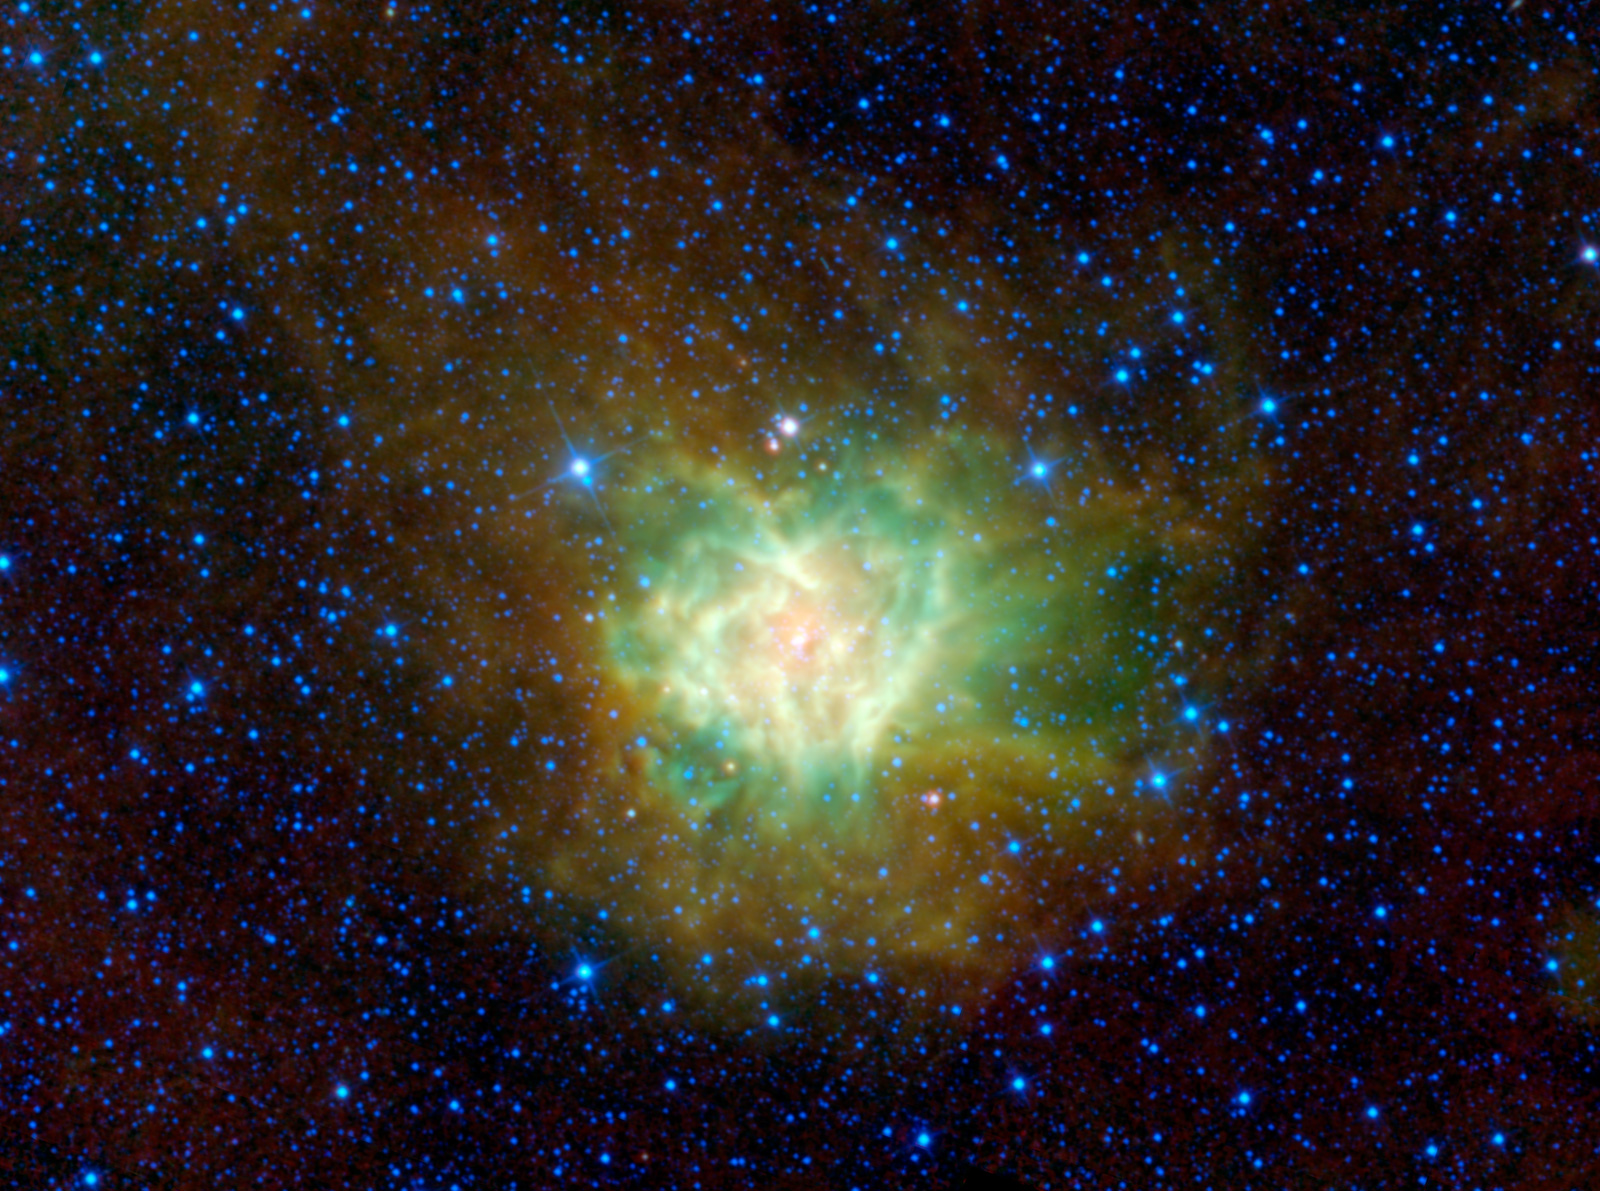 A bright blob of orange-colored star dusts in the middle with blue stars in the background.